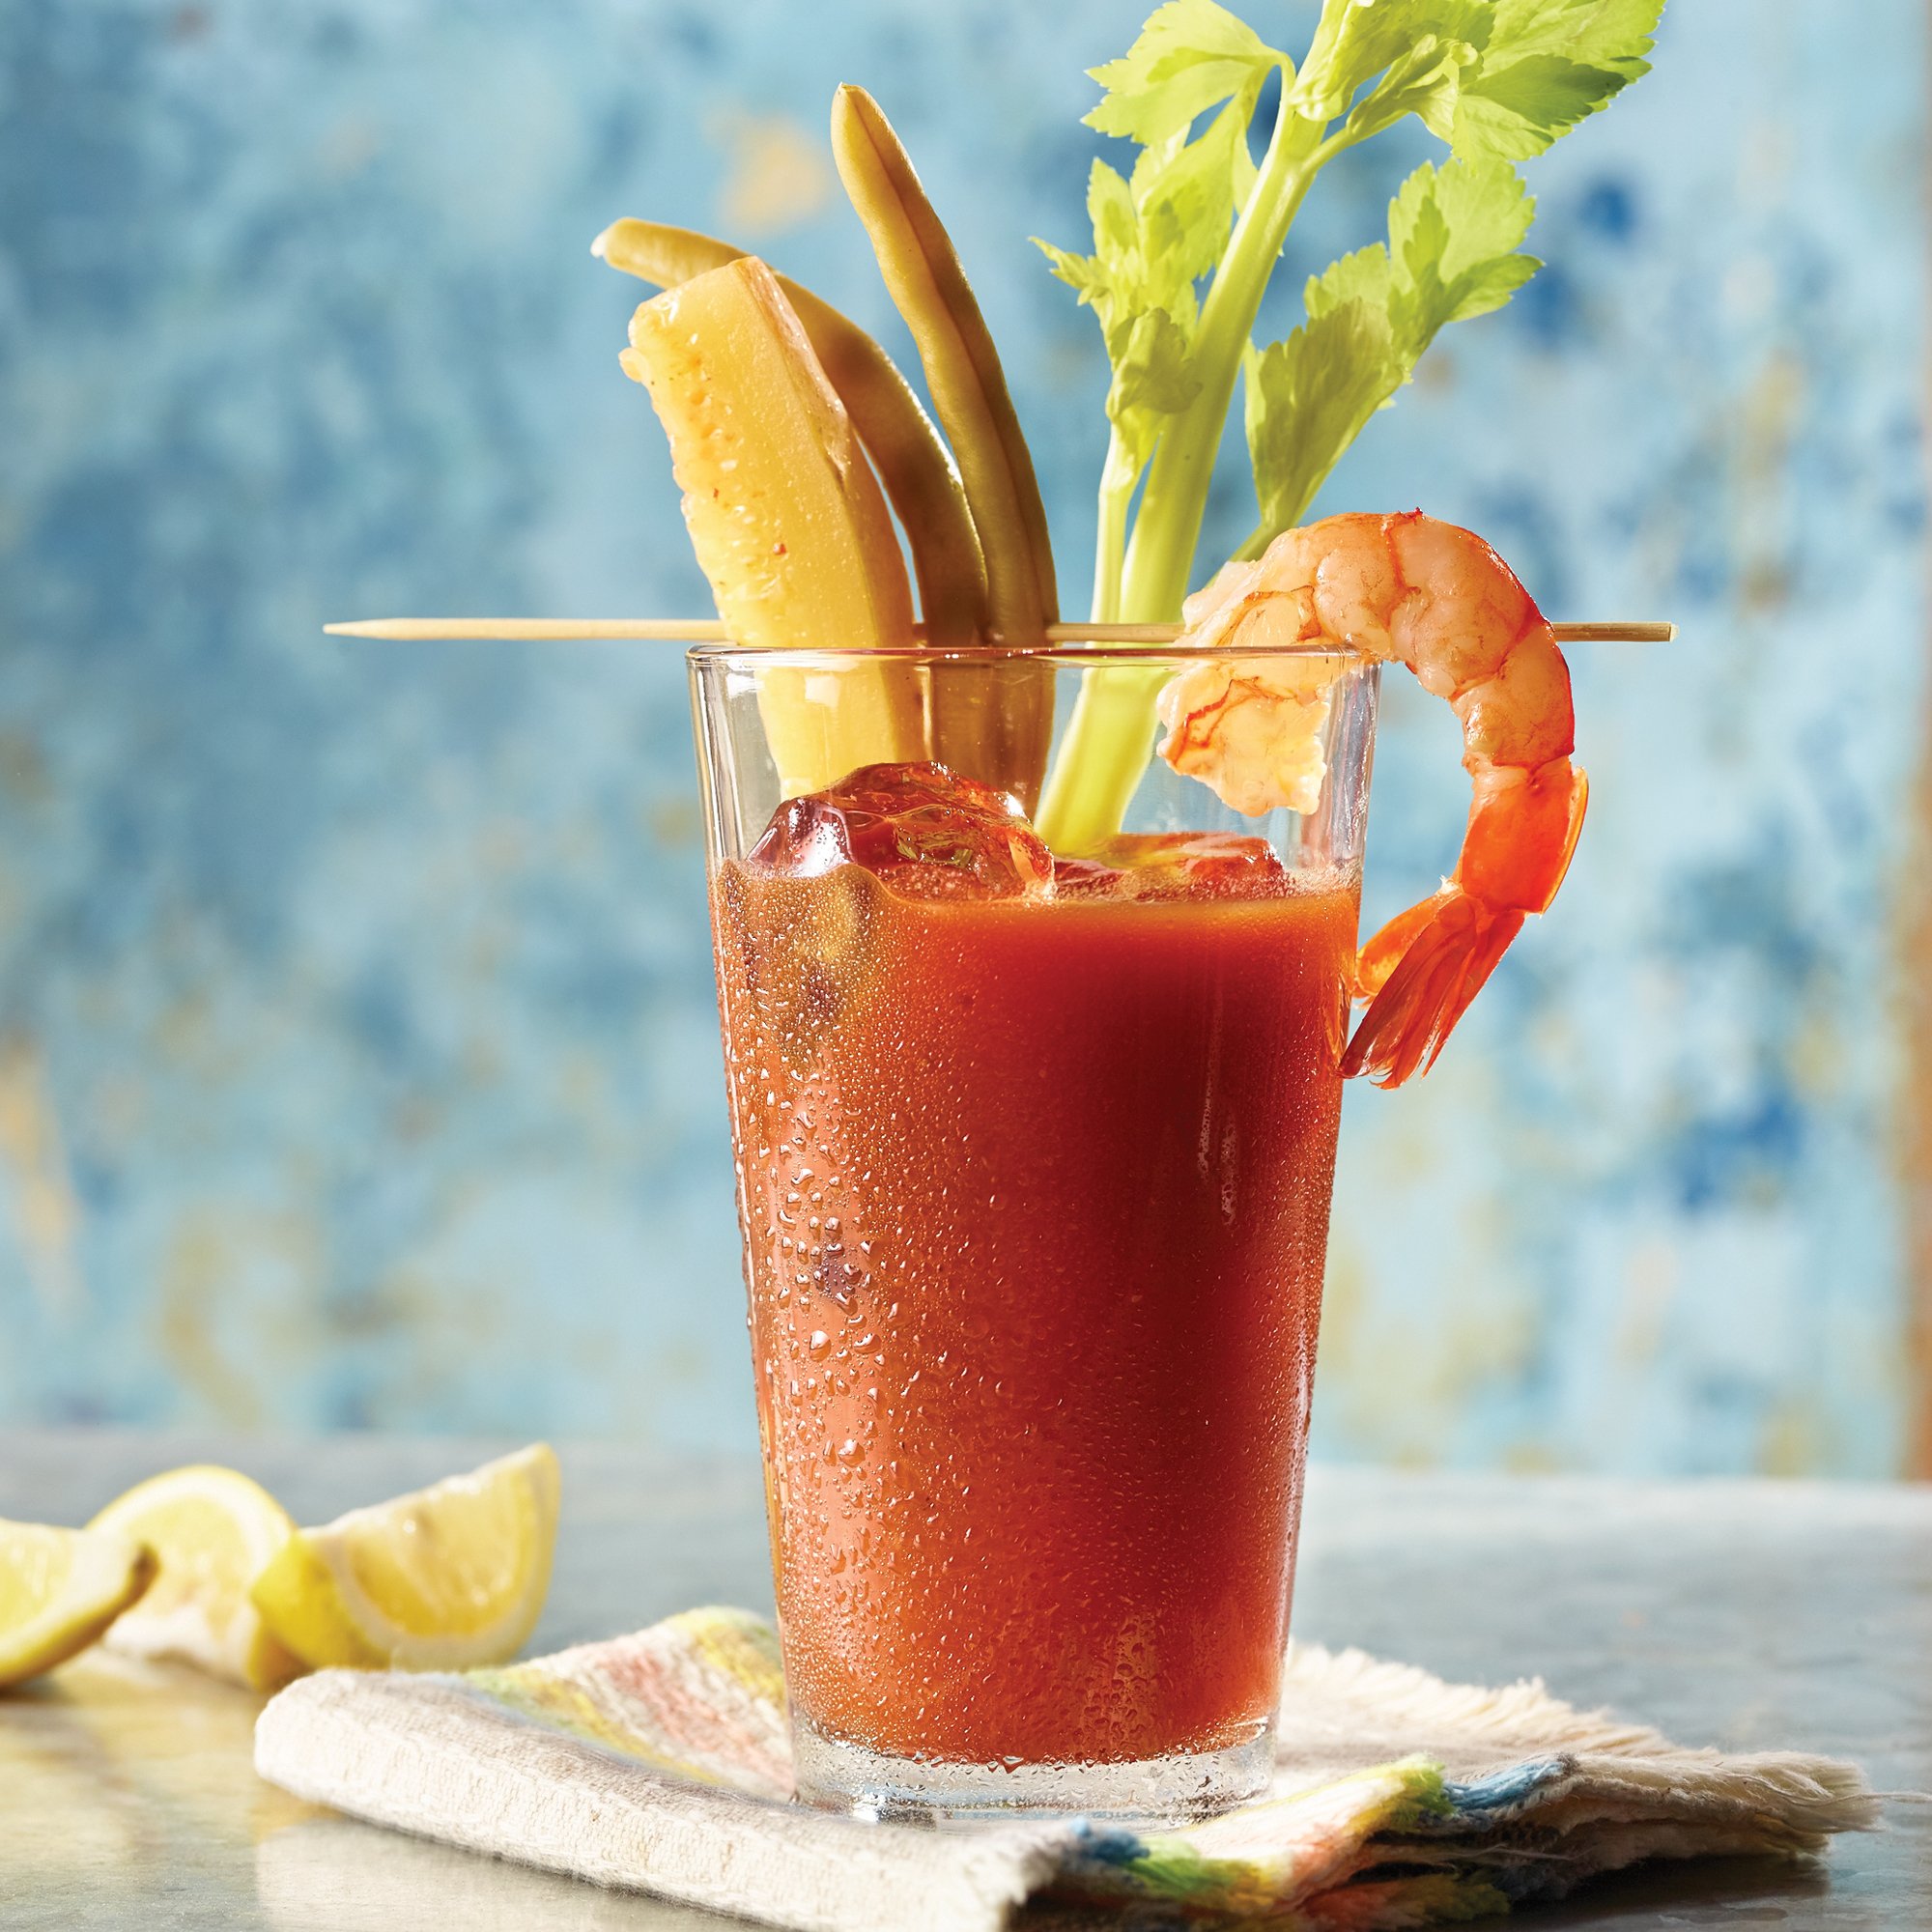 https://images.heb.com/is/image/HEBGrocery/recipe-hm-large/spicy-dill-pickle-bloody-mary-recipe.jpg